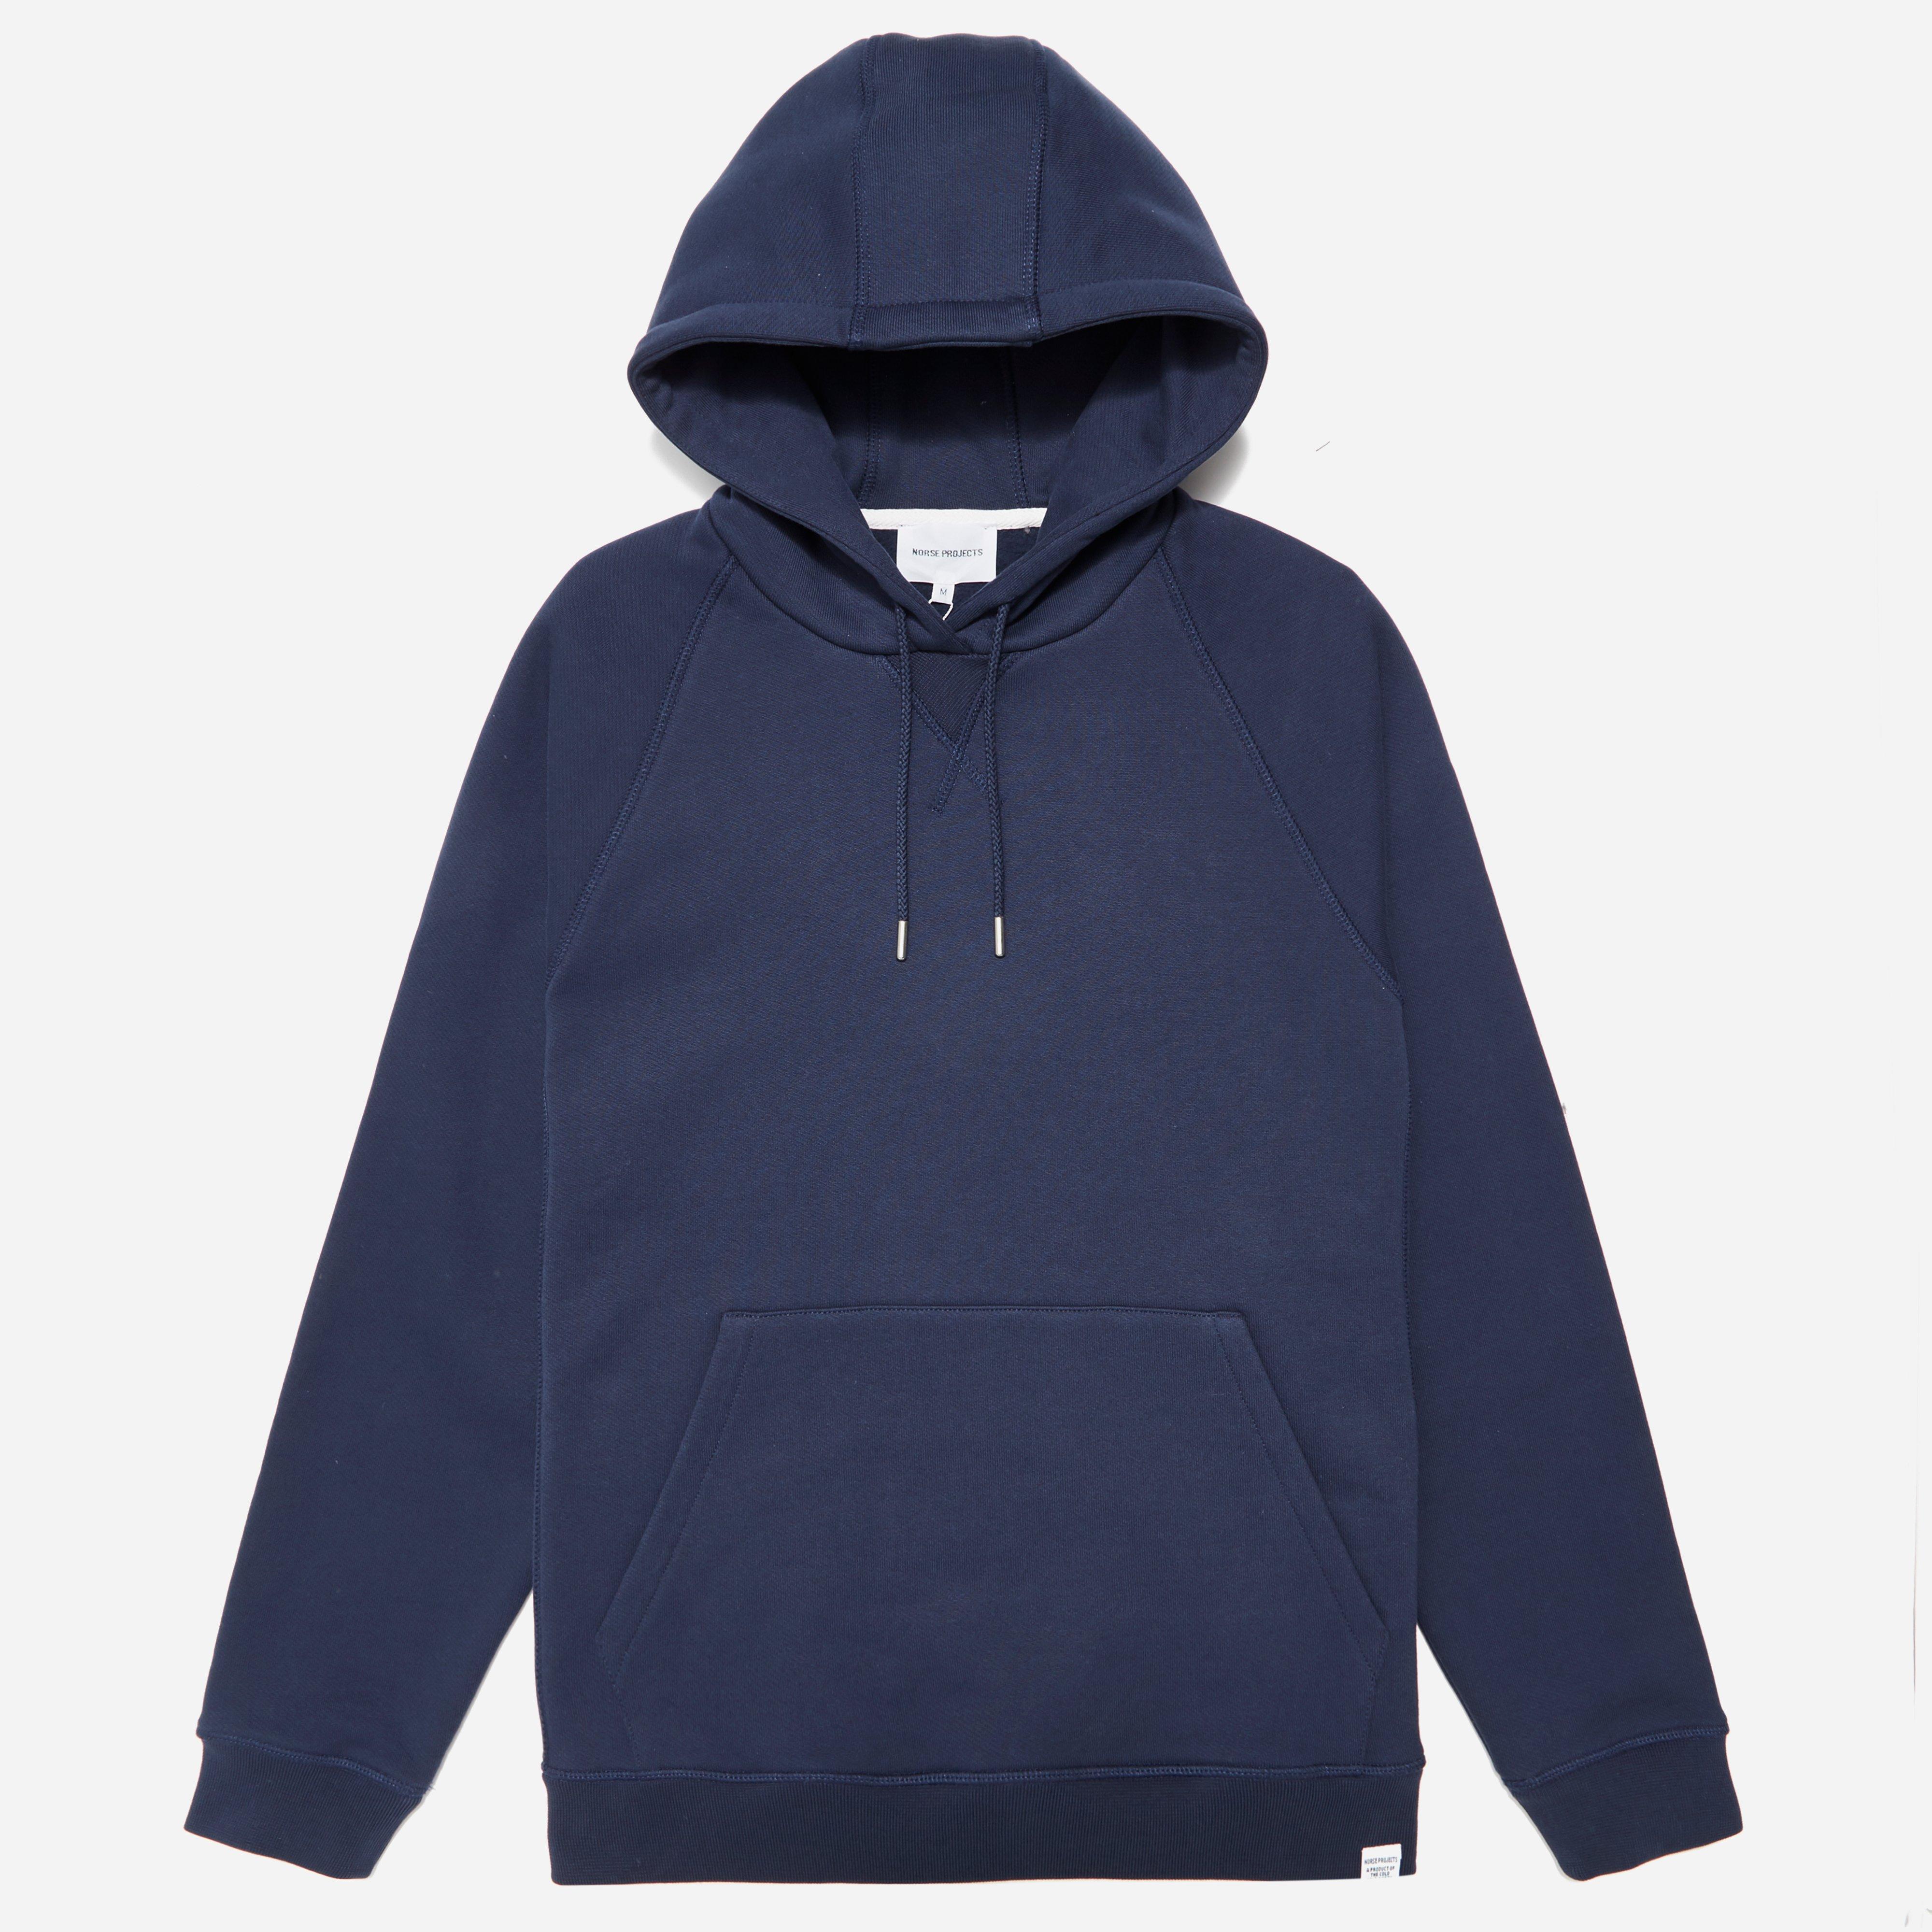 Lyst - Norse Projects Ketel Classic Hooded Sweatshirt in Blue for Men